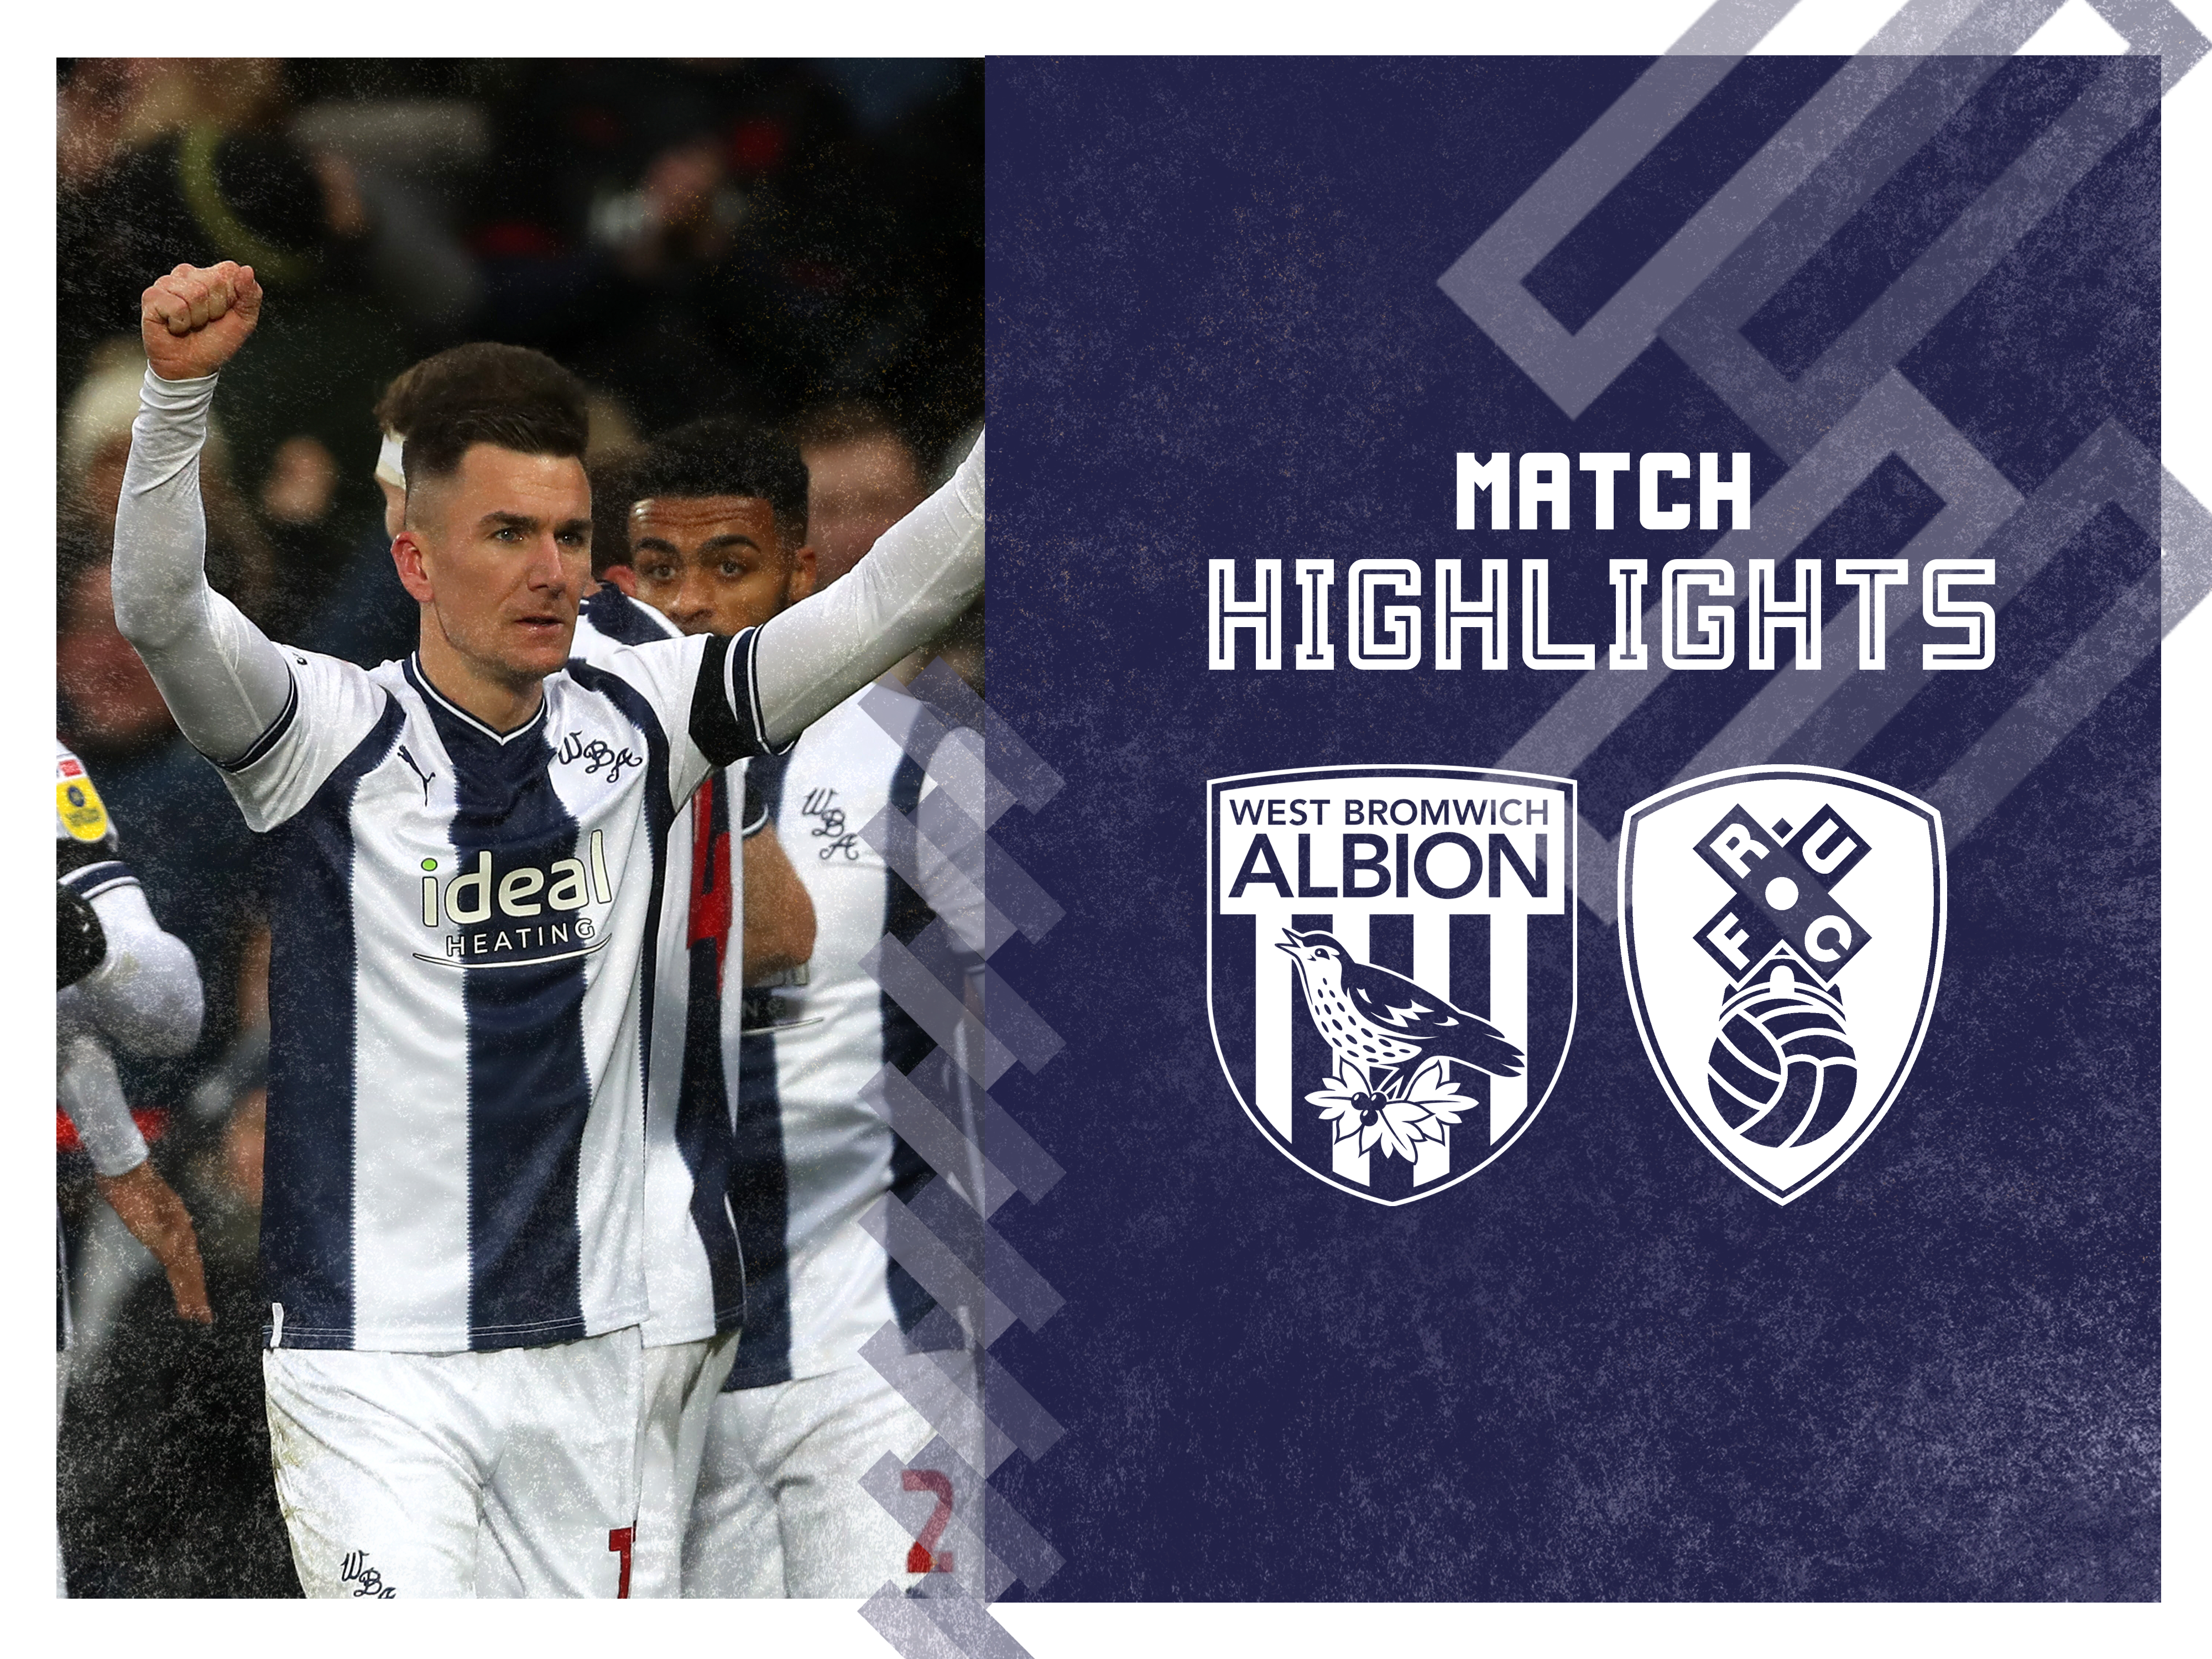 Graphic for Albion v Rotherham match highlights